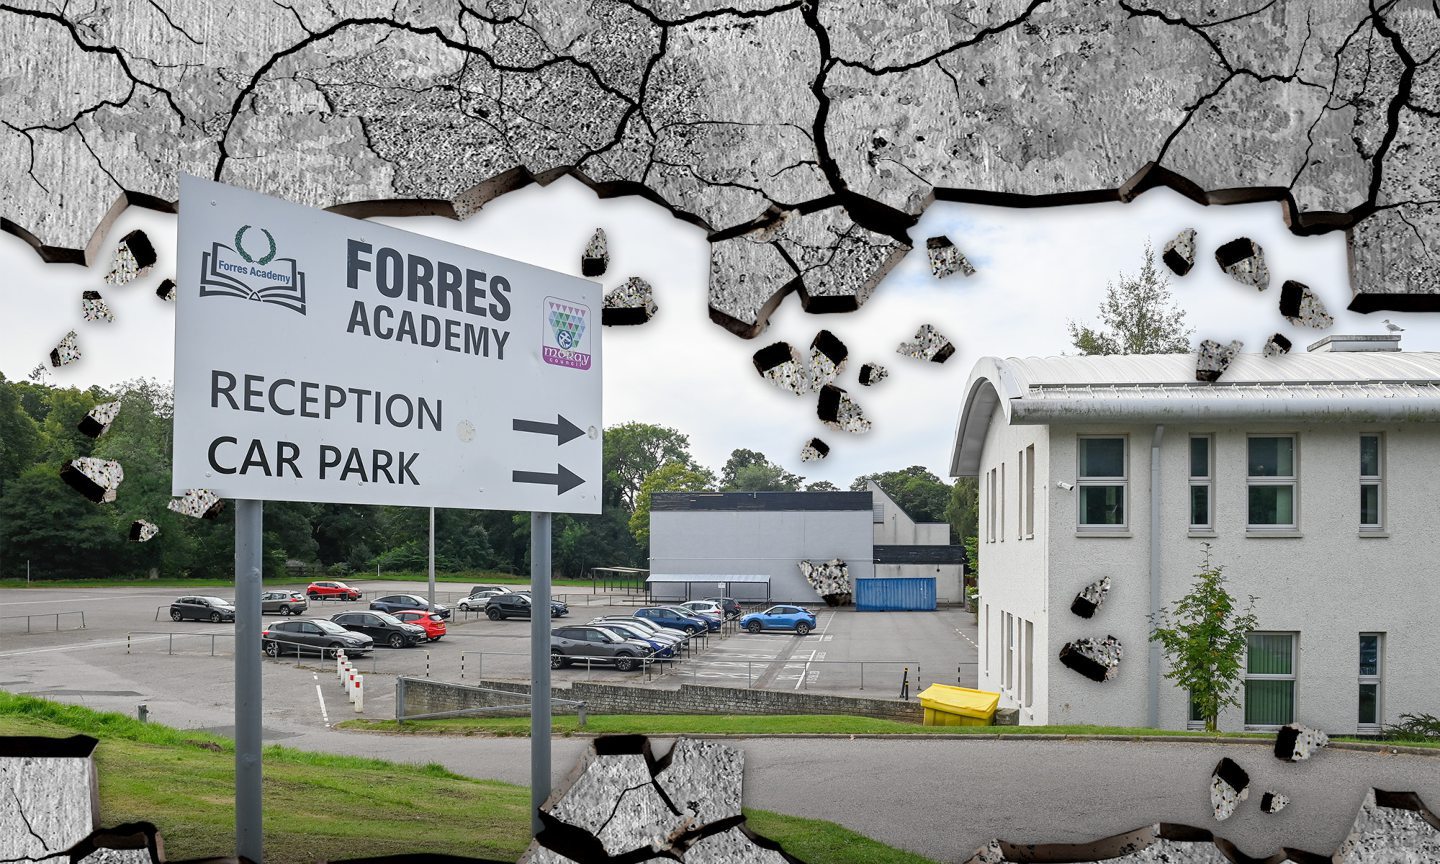 The exterior of Forres Academy